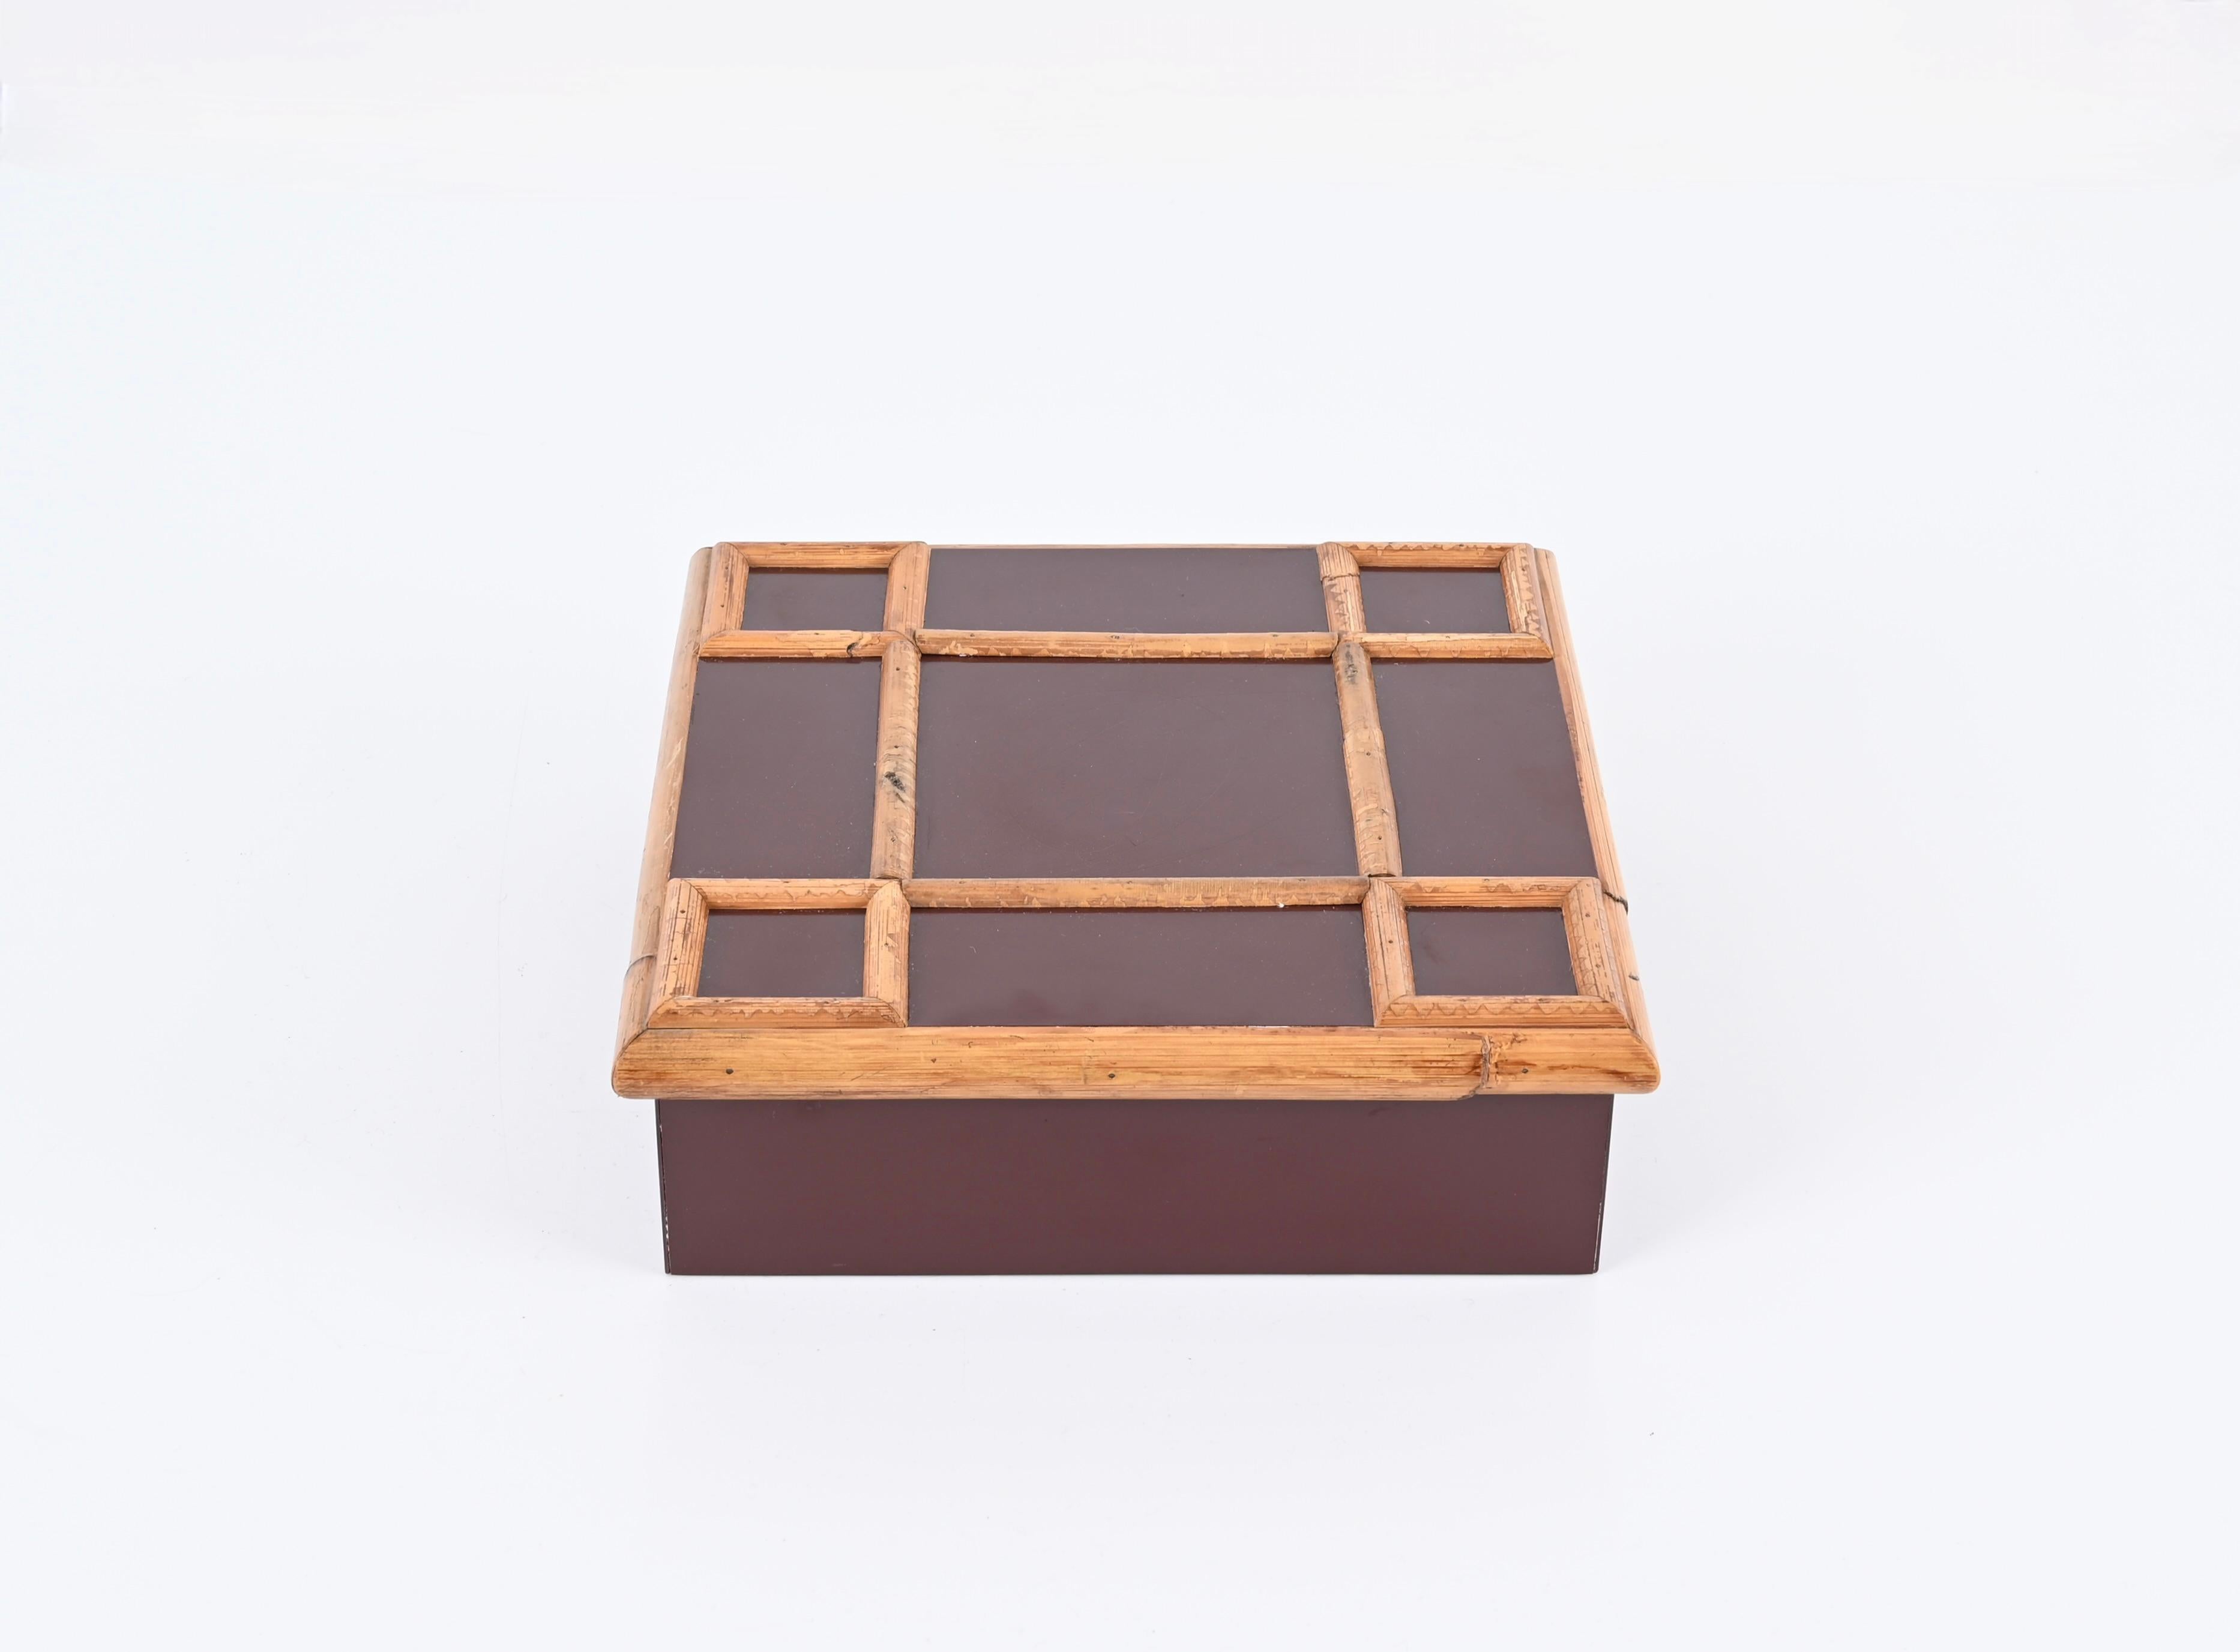 Hand-Crafted Bordeaux Bakelite and Bamboo Square Italian Decorative Box, Tommaso Barbi 1980s For Sale